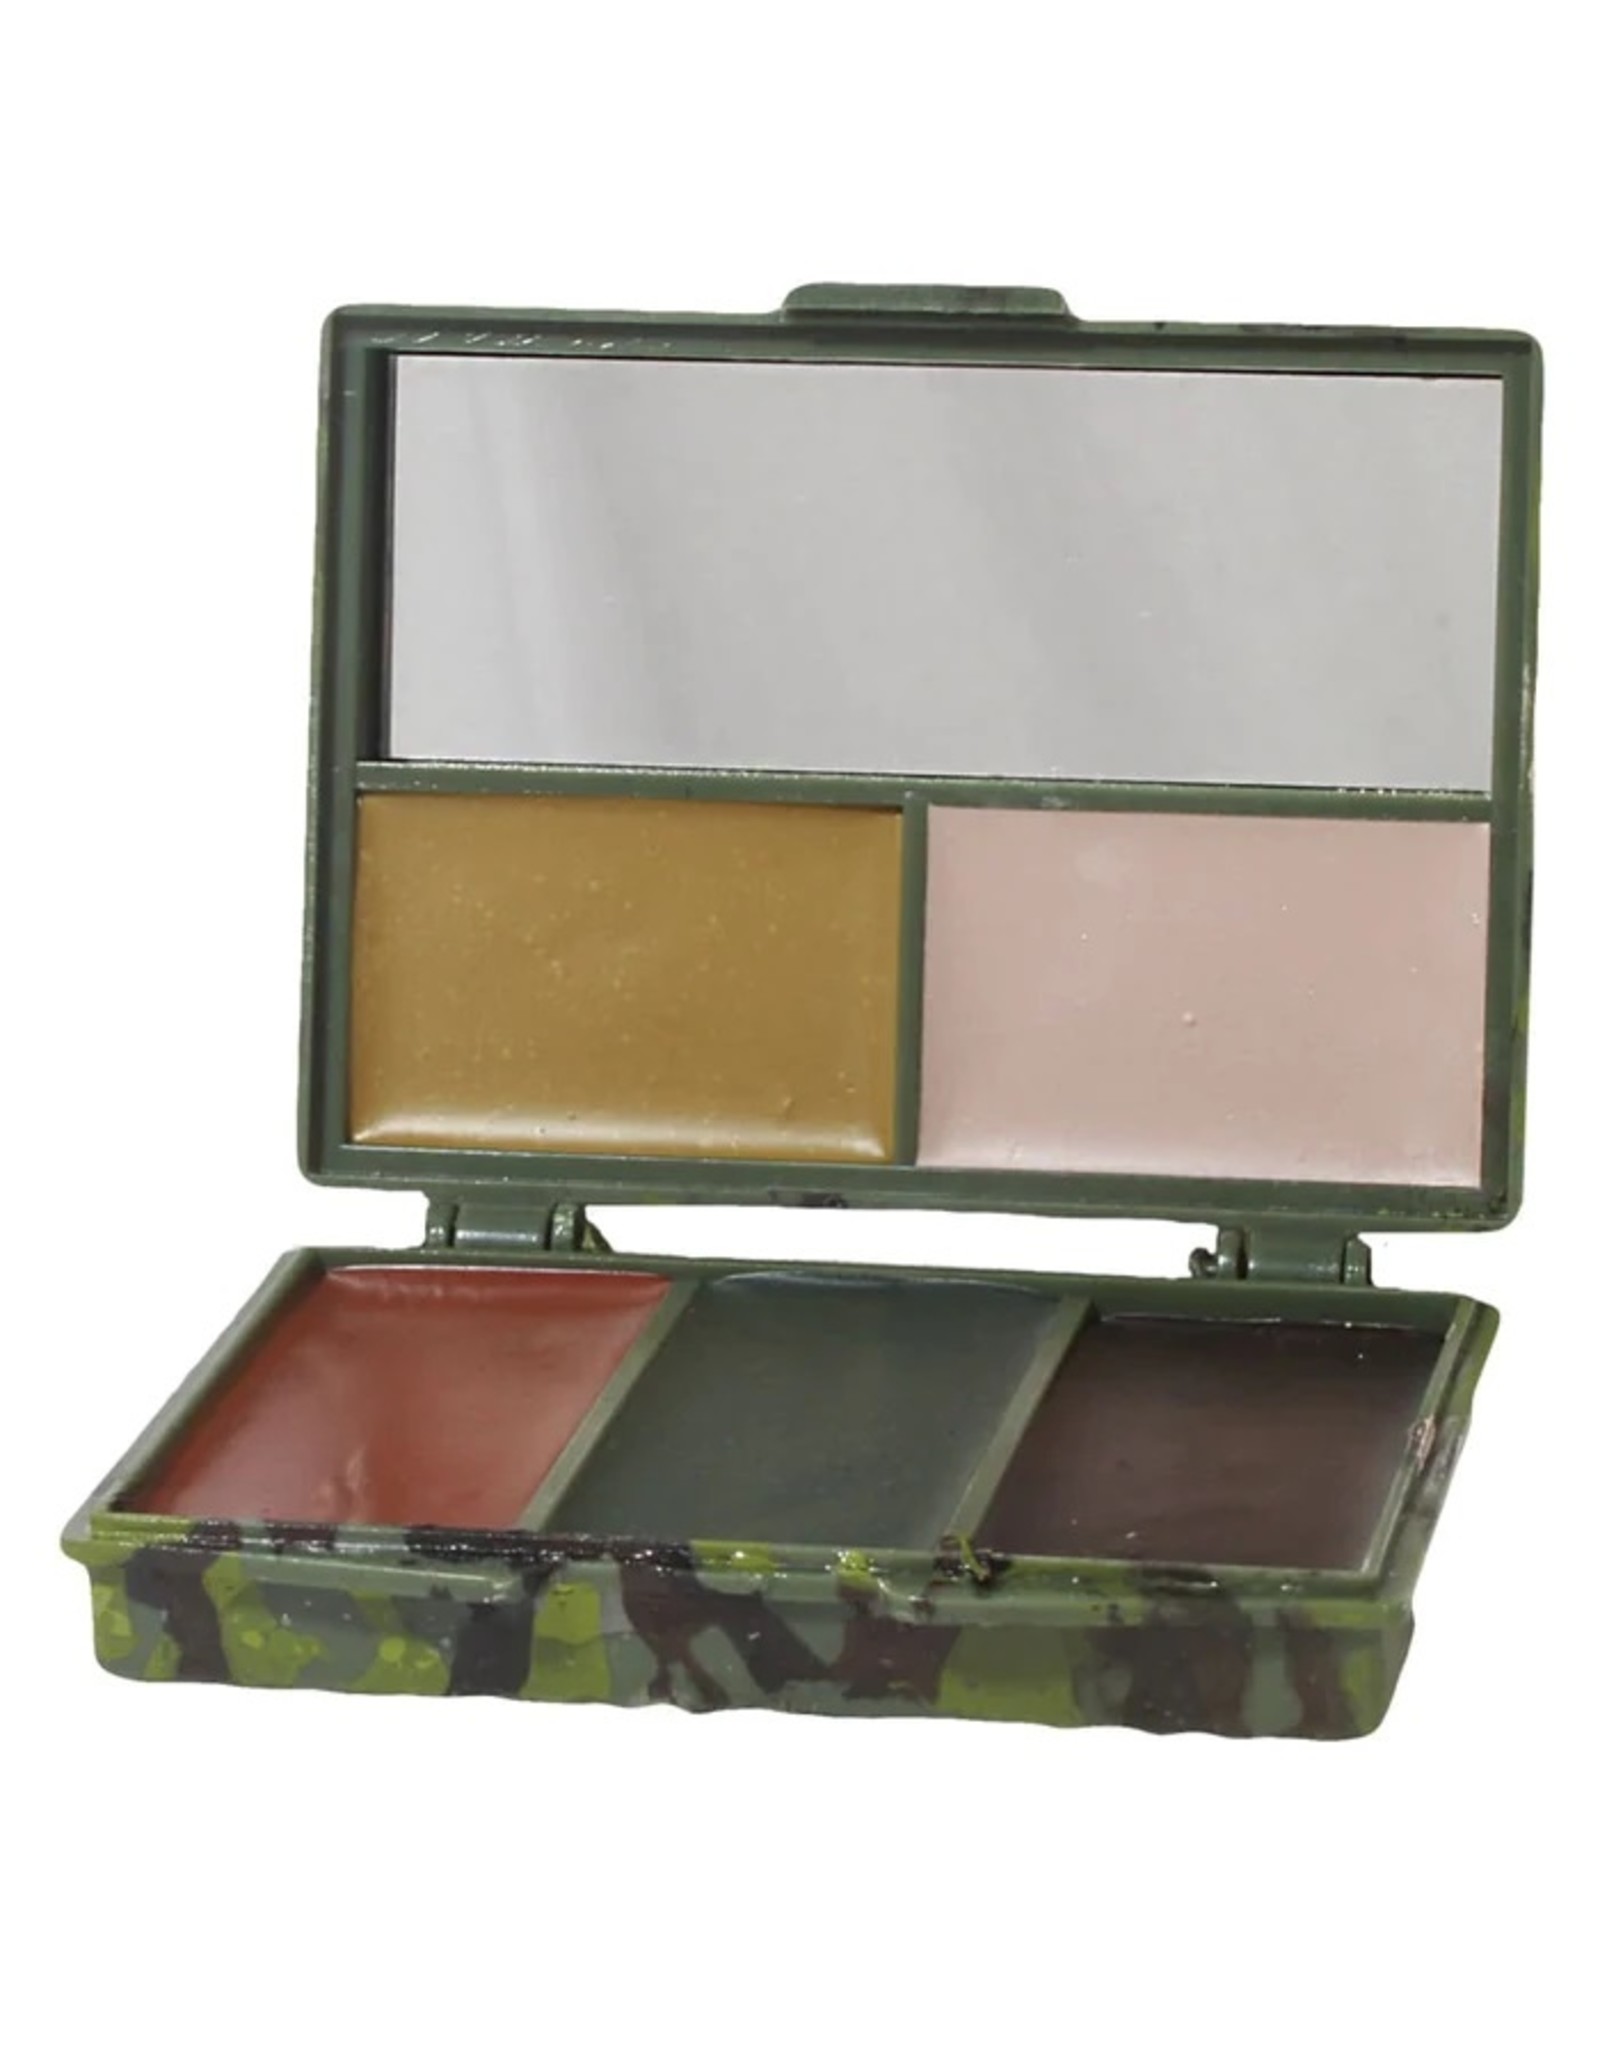 FOX TACTICAL GEAR FIVE COLOUR CAMOUFLAGE COMPACT